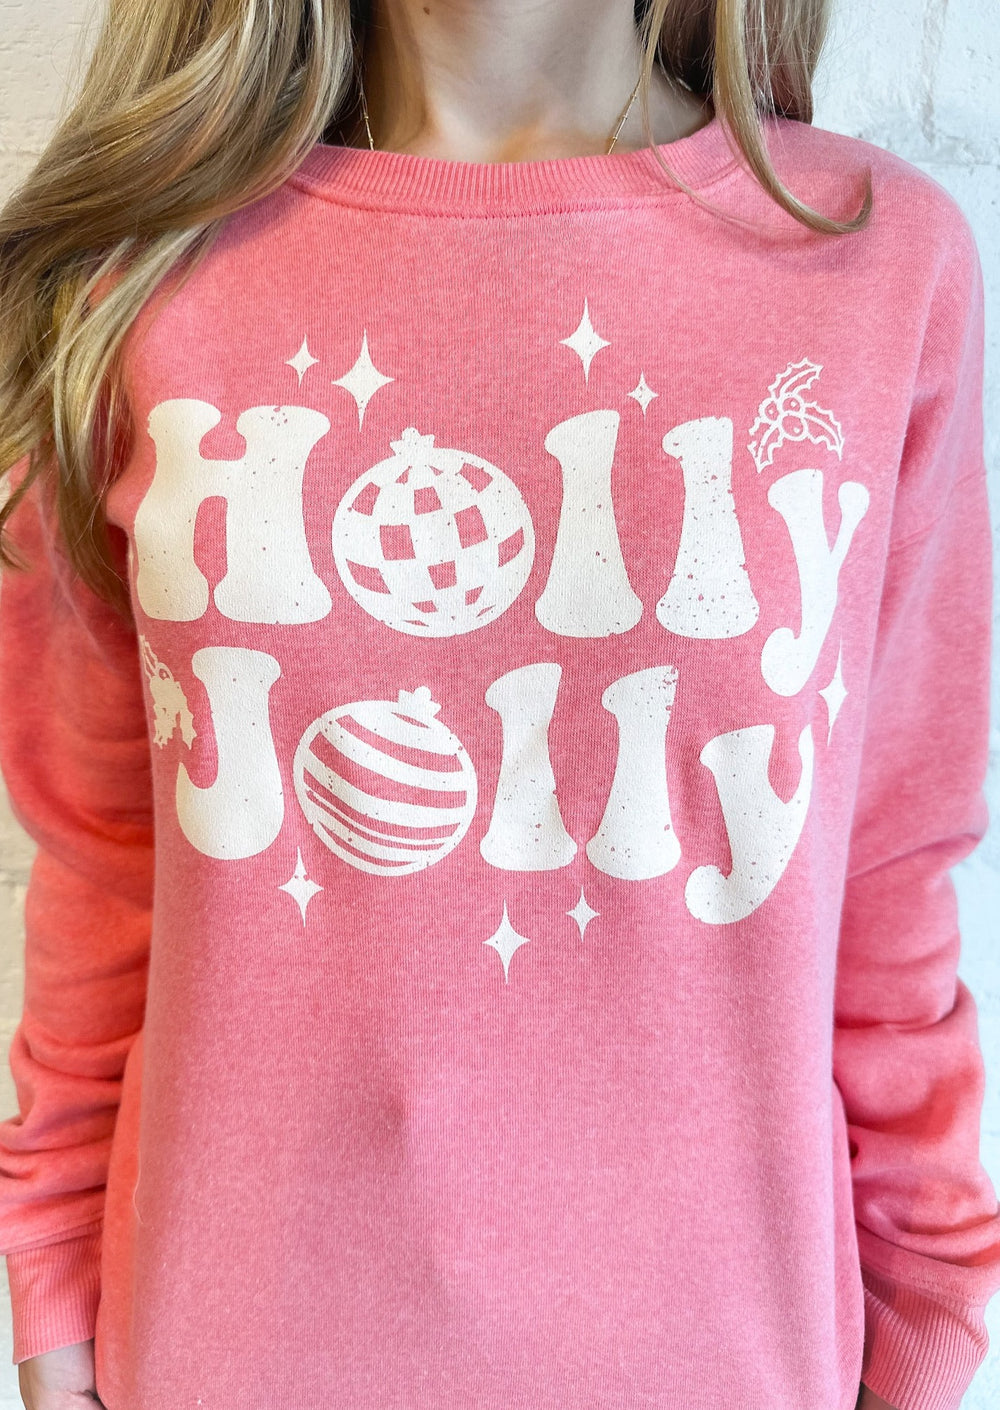 Holly Jolly Sweatshirt, Tops, Adeline, Adeline, dallas boutique, dallas texas, texas boutique, women's boutique dallas, adeline boutique, dallas boutique, trendy boutique, affordable boutique